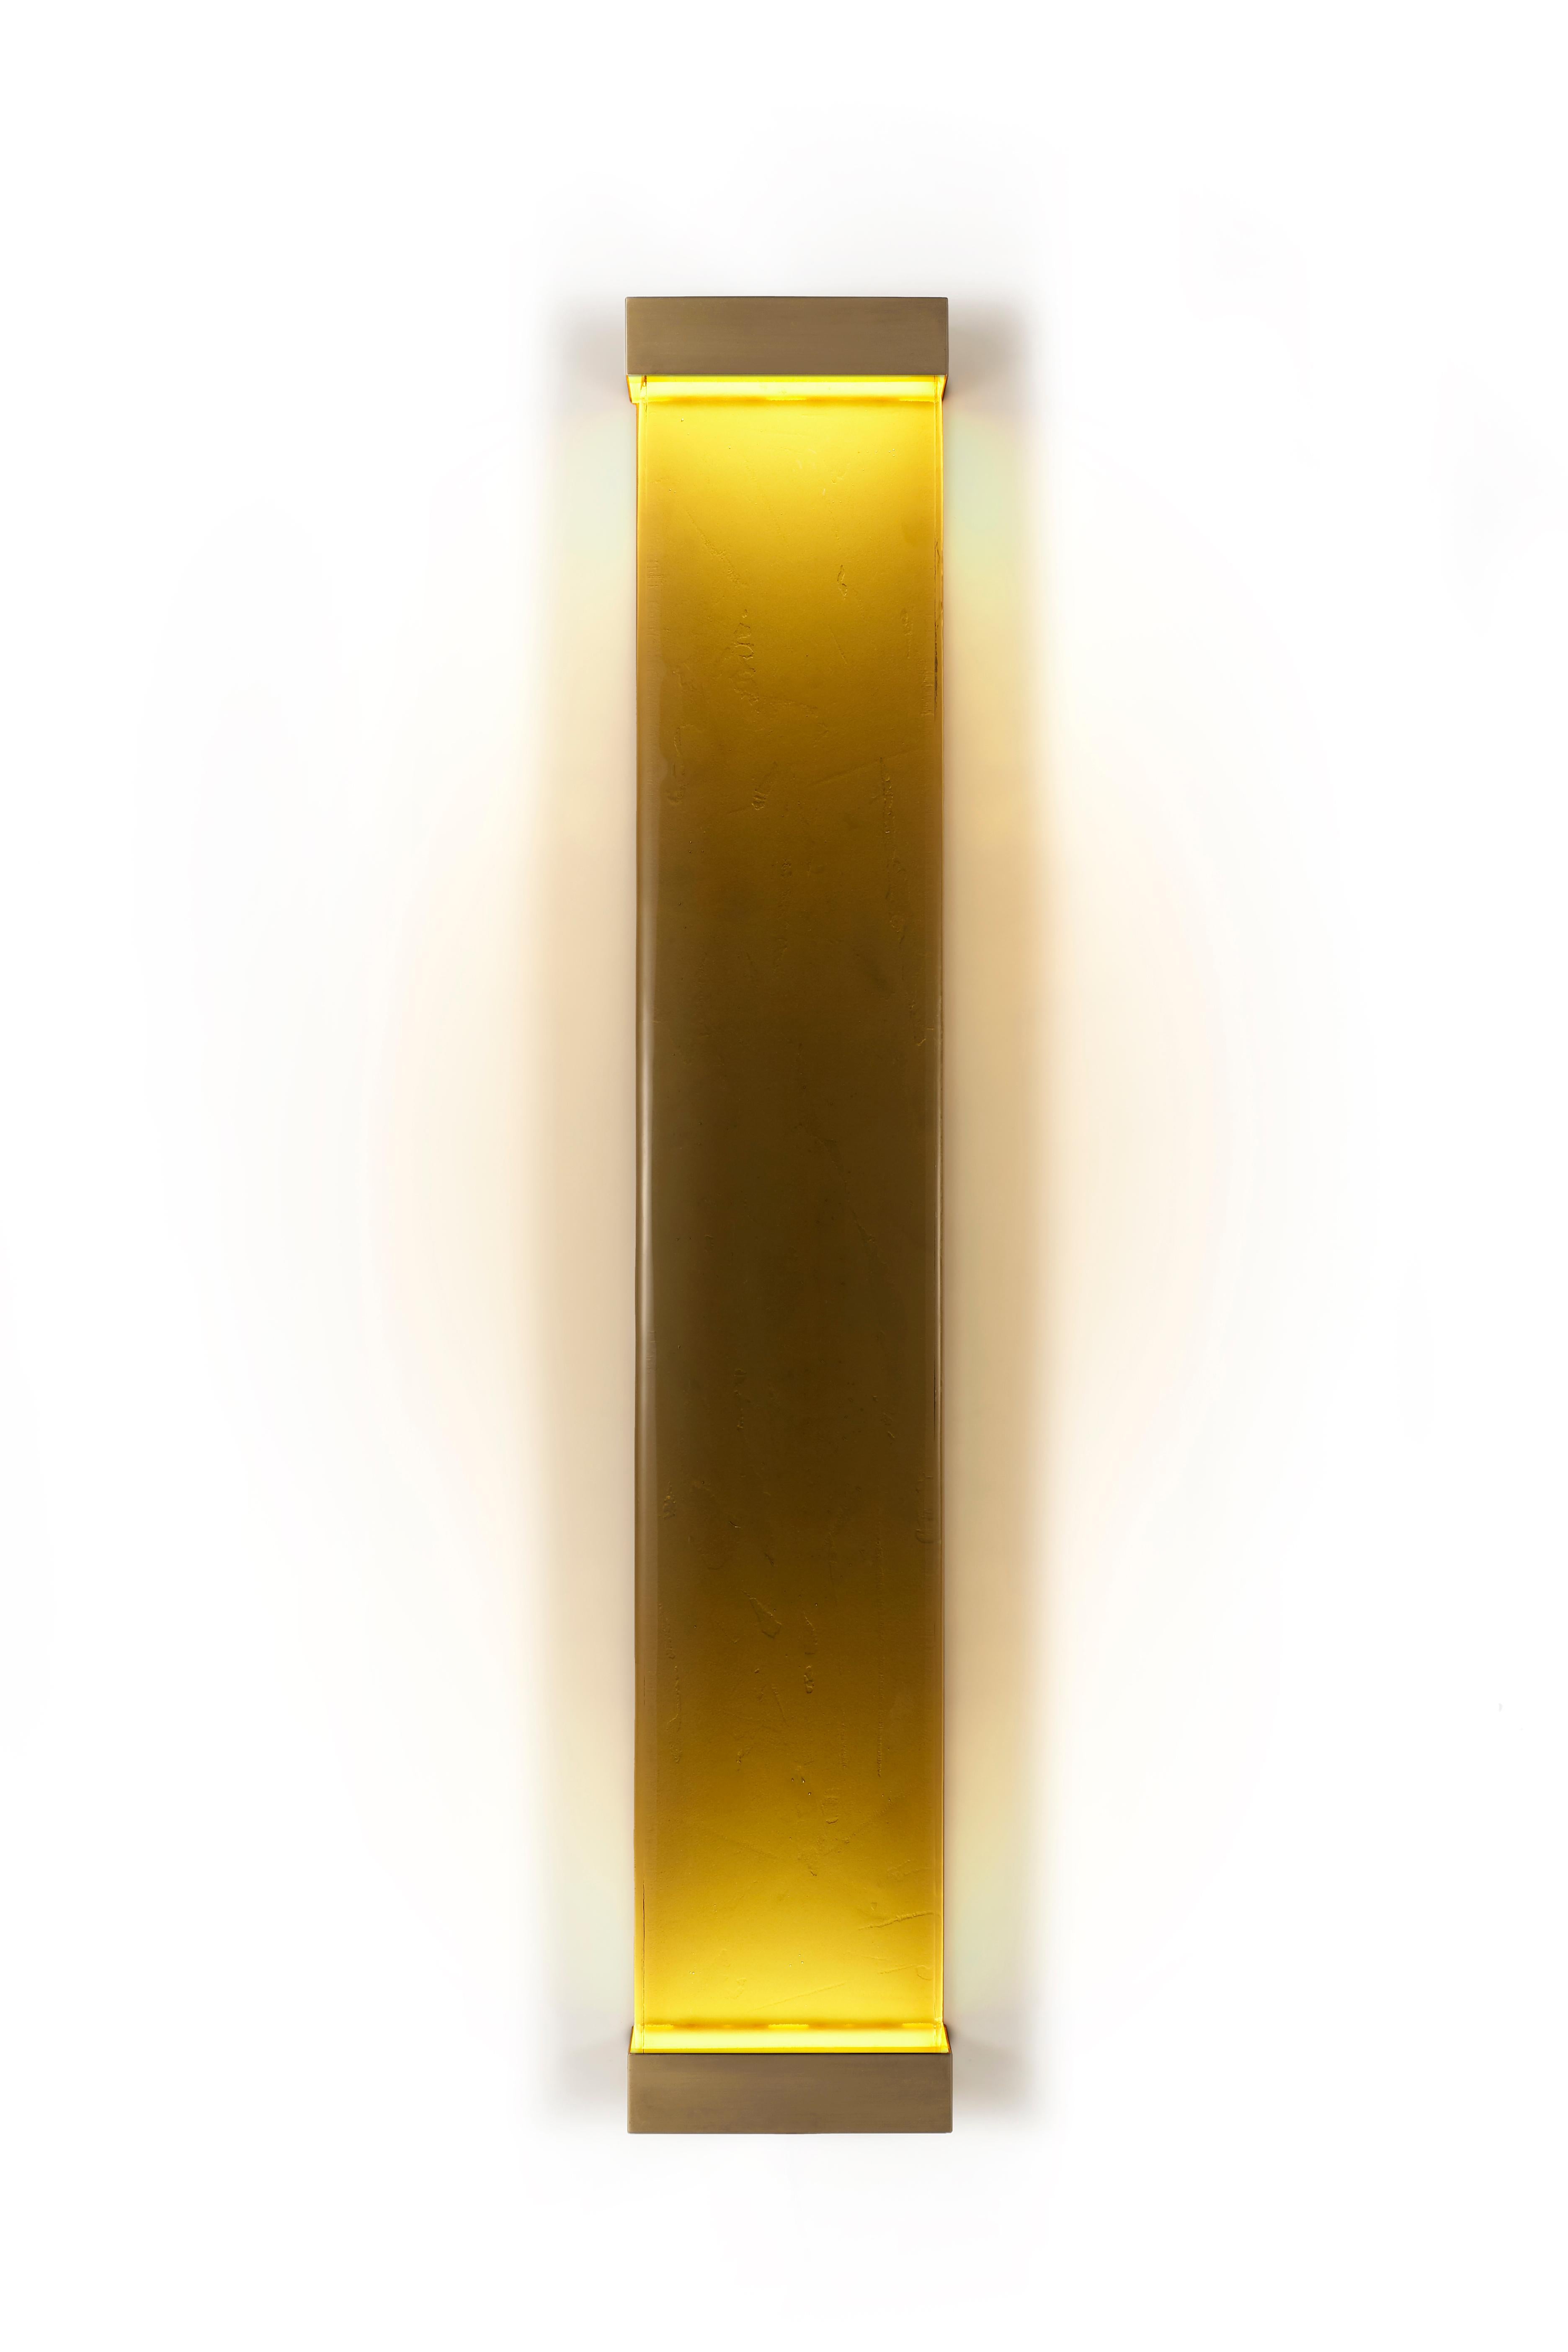 Jud Wall Lamps Ambra by Draga&Aurel Resin, 21st Century Glass Resin Brass For Sale